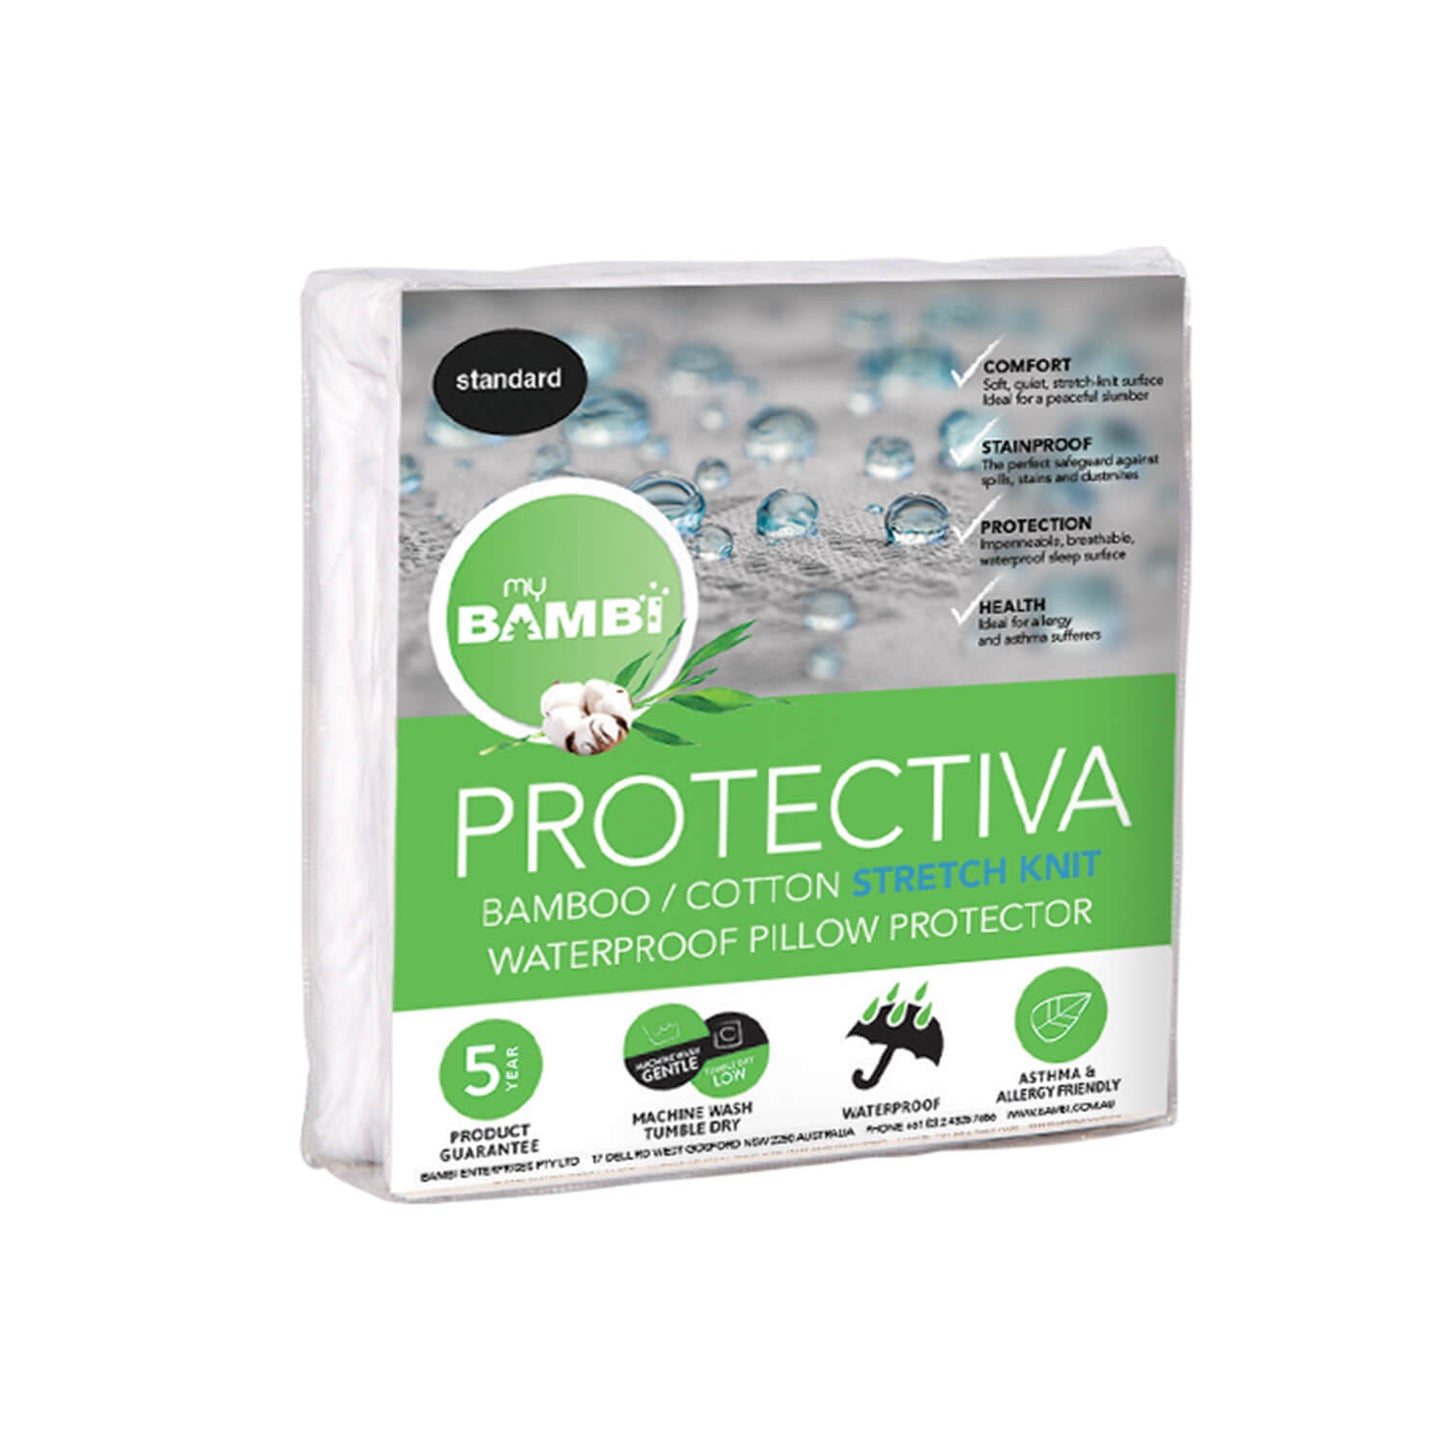 Protectiva Cotton/Bamboo Waterproof Pillow Protector – Stretch Knit by Bambi